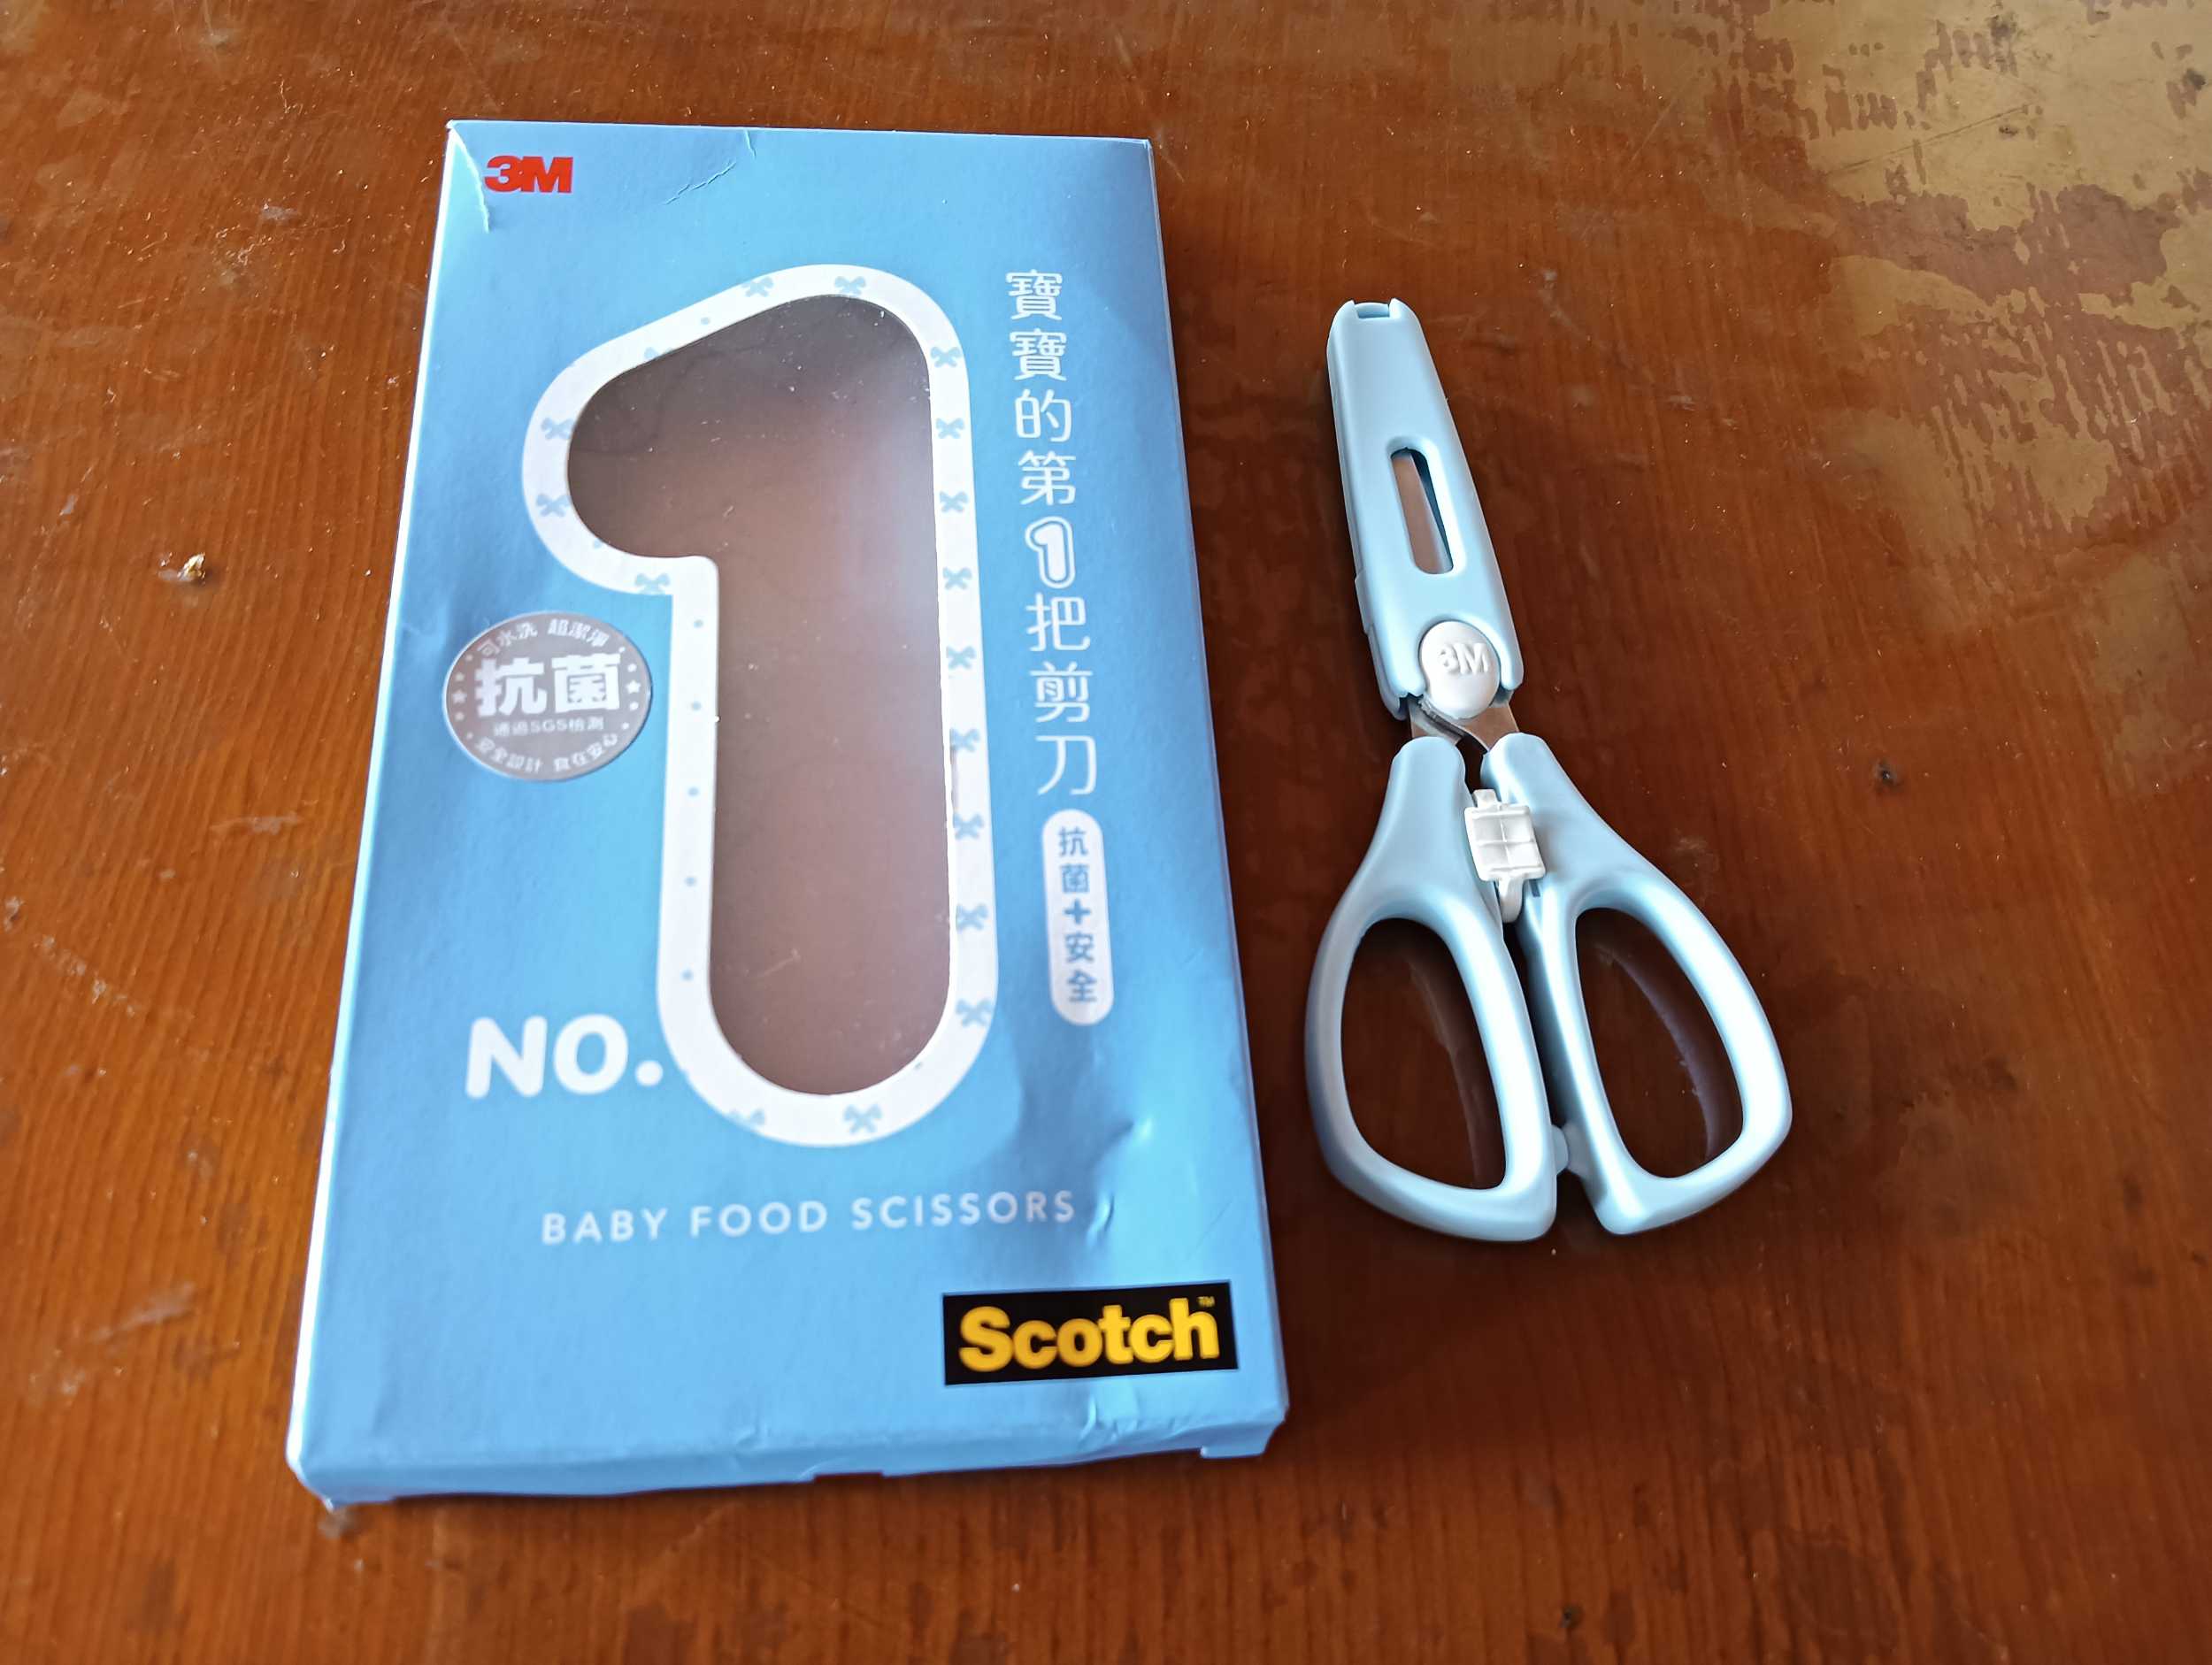 3M Scotch Baby Food Scissors BFS with Cover